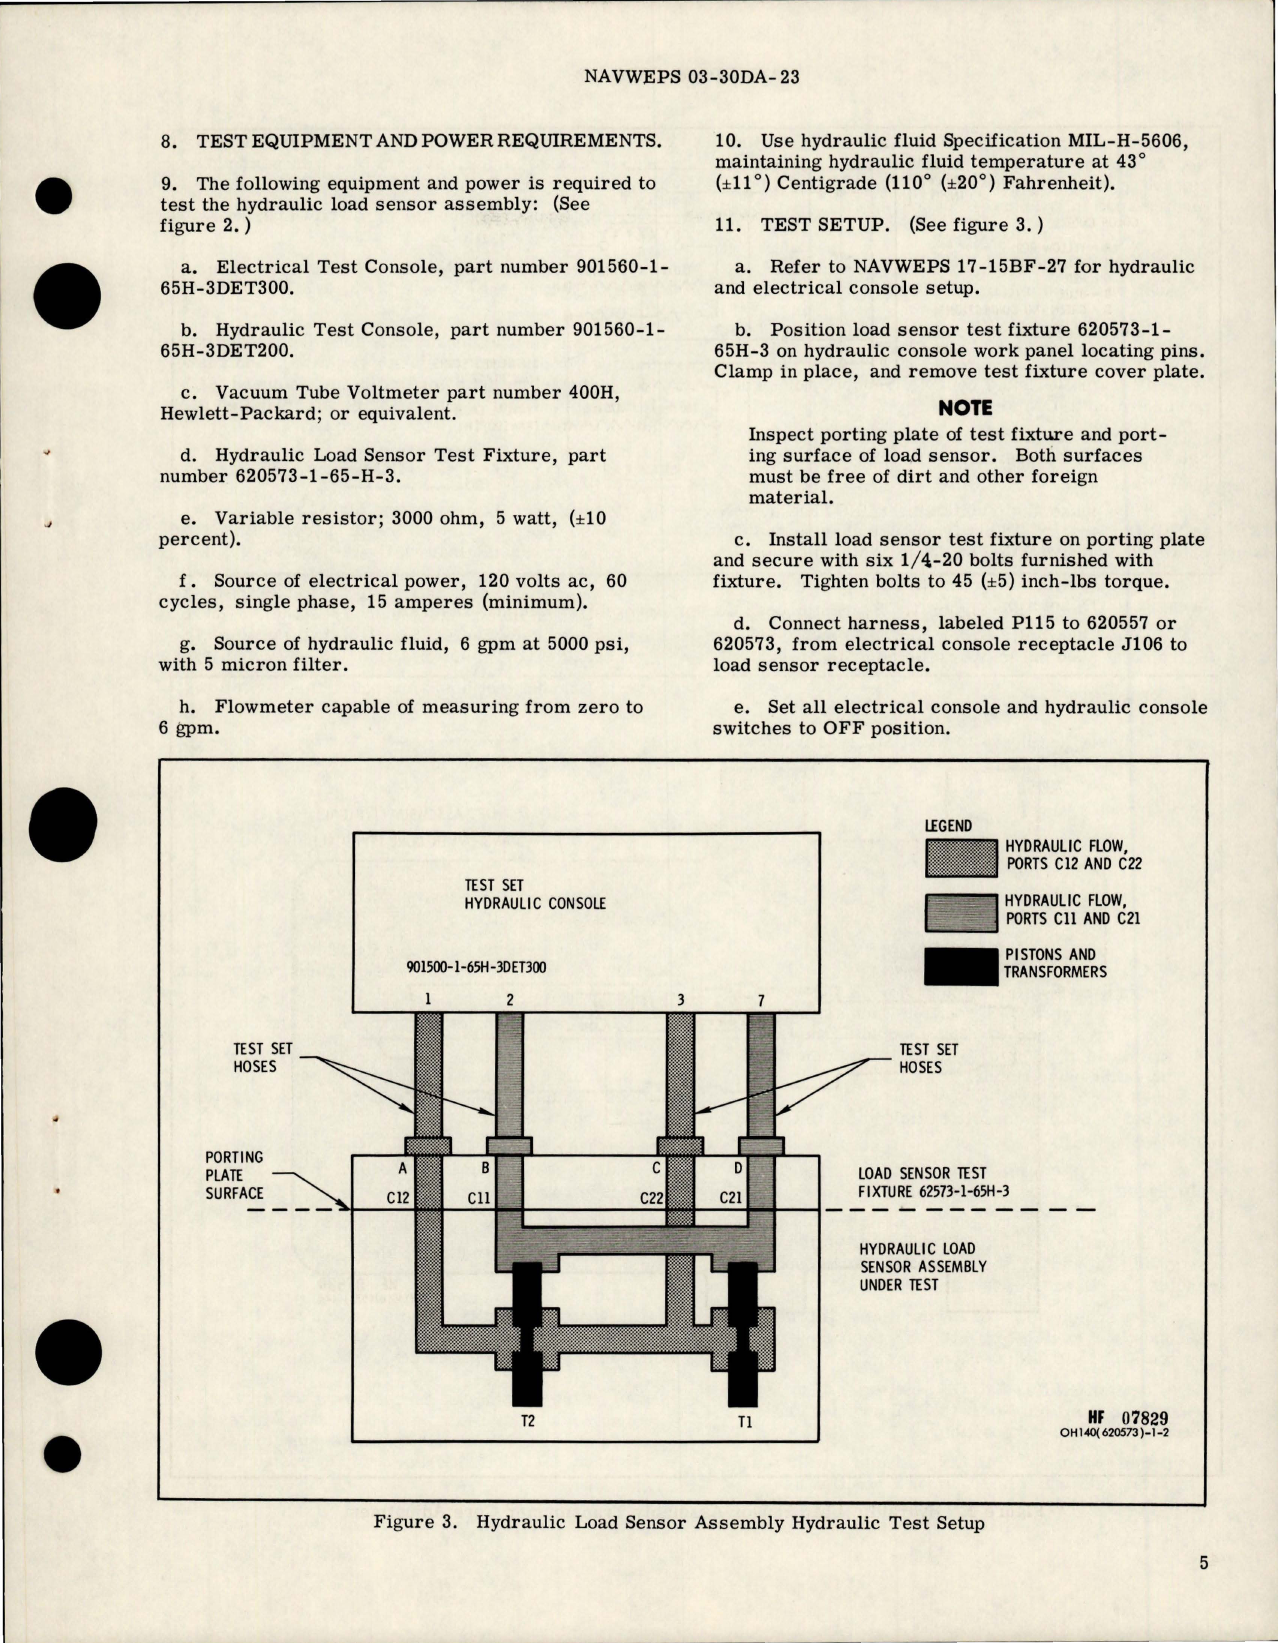 Sample page 7 from AirCorps Library document: Overhaul Instructions with Parts for Hydraulic Load Sensor Assembly - Part 27500-1 